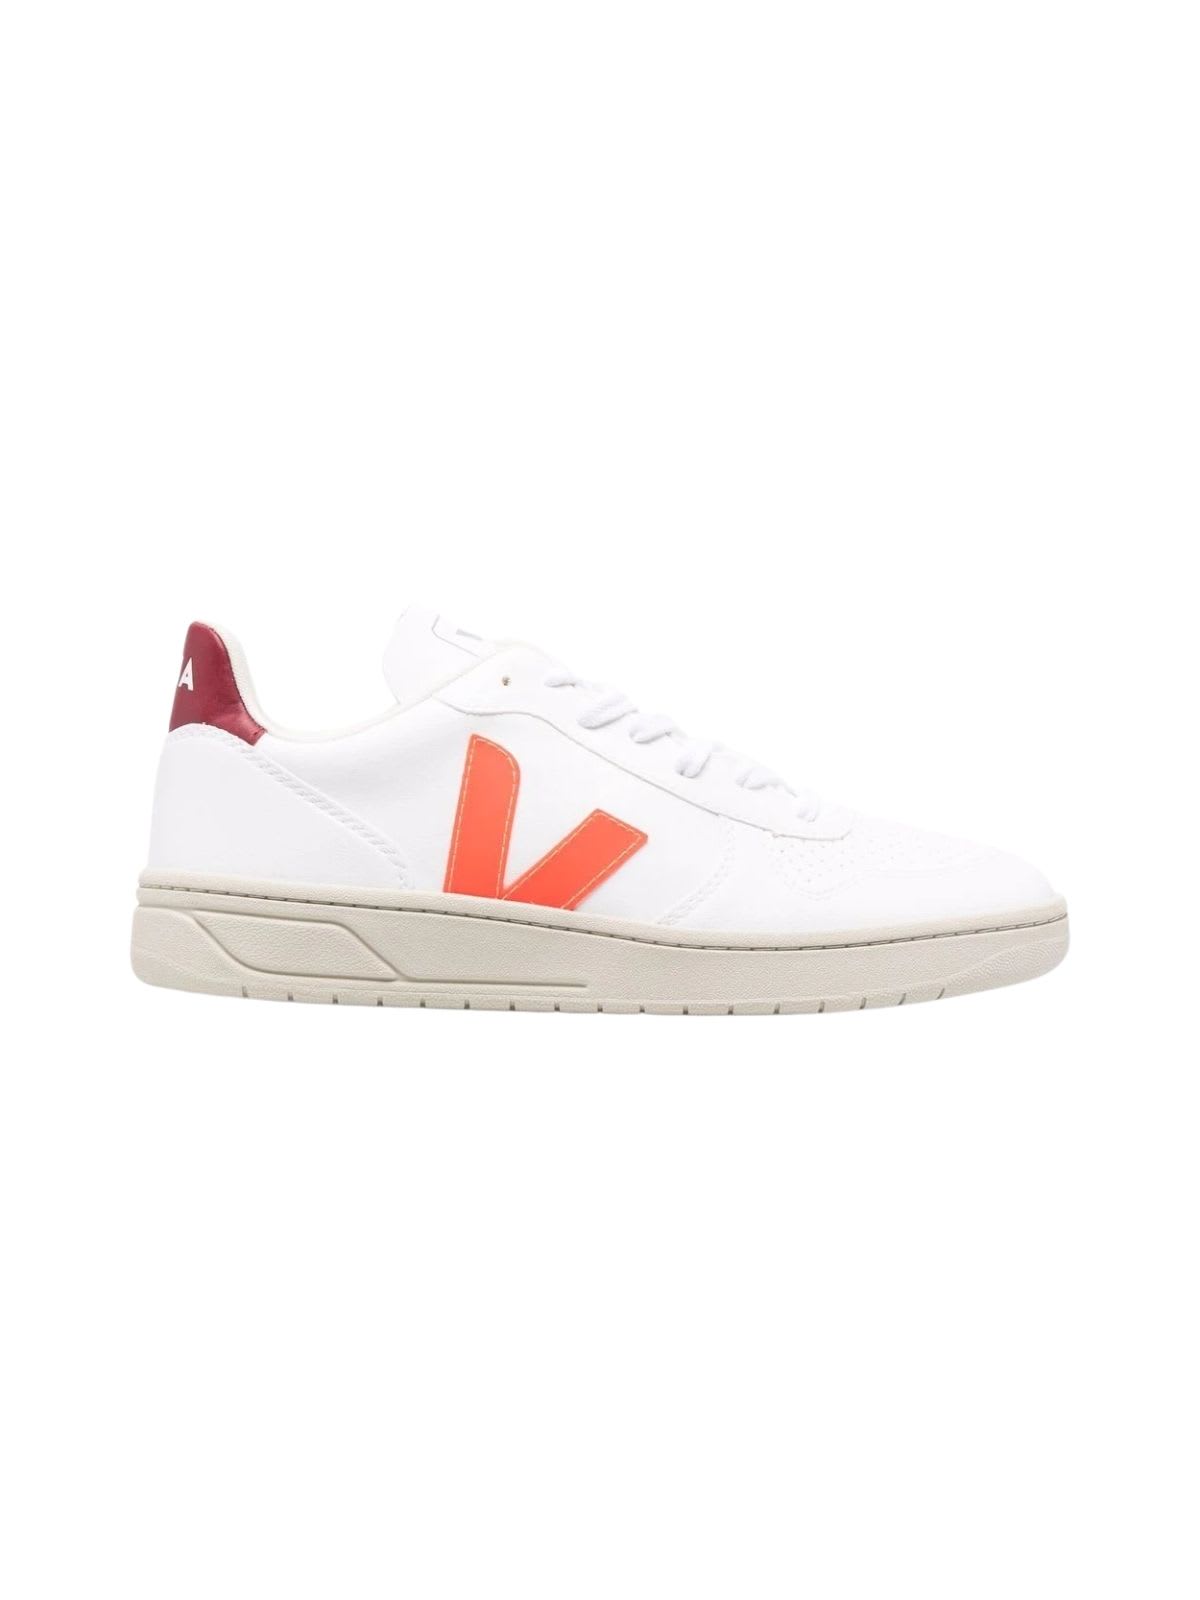 Veja White And Orange Fluo Shoes